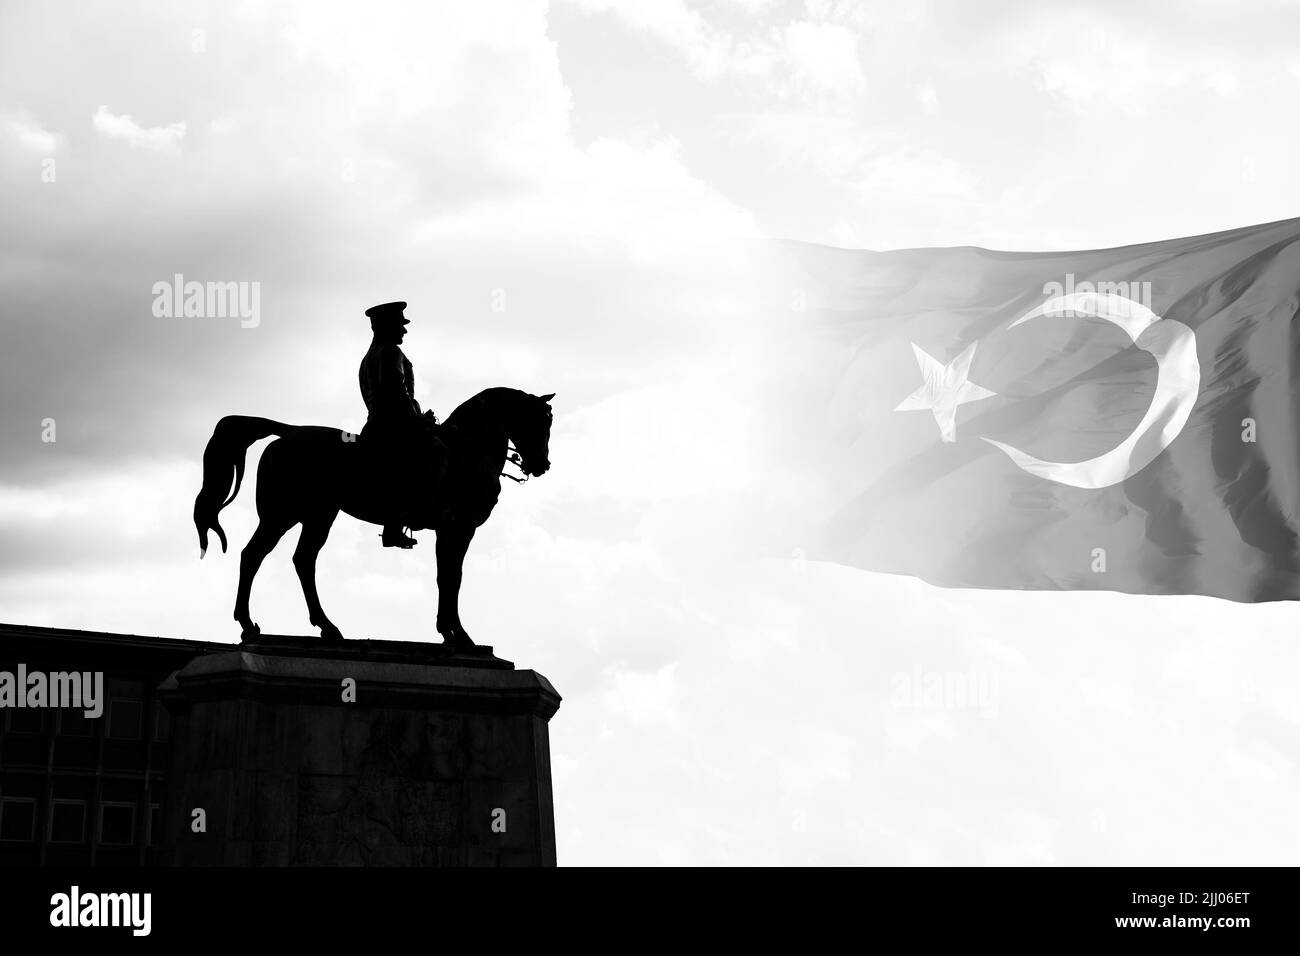 Monochrome silhouette of monument of Ataturk and Turkish Flag. 10 kasim or 10th november memorial day of Ataturk concept photo. Stock Photo